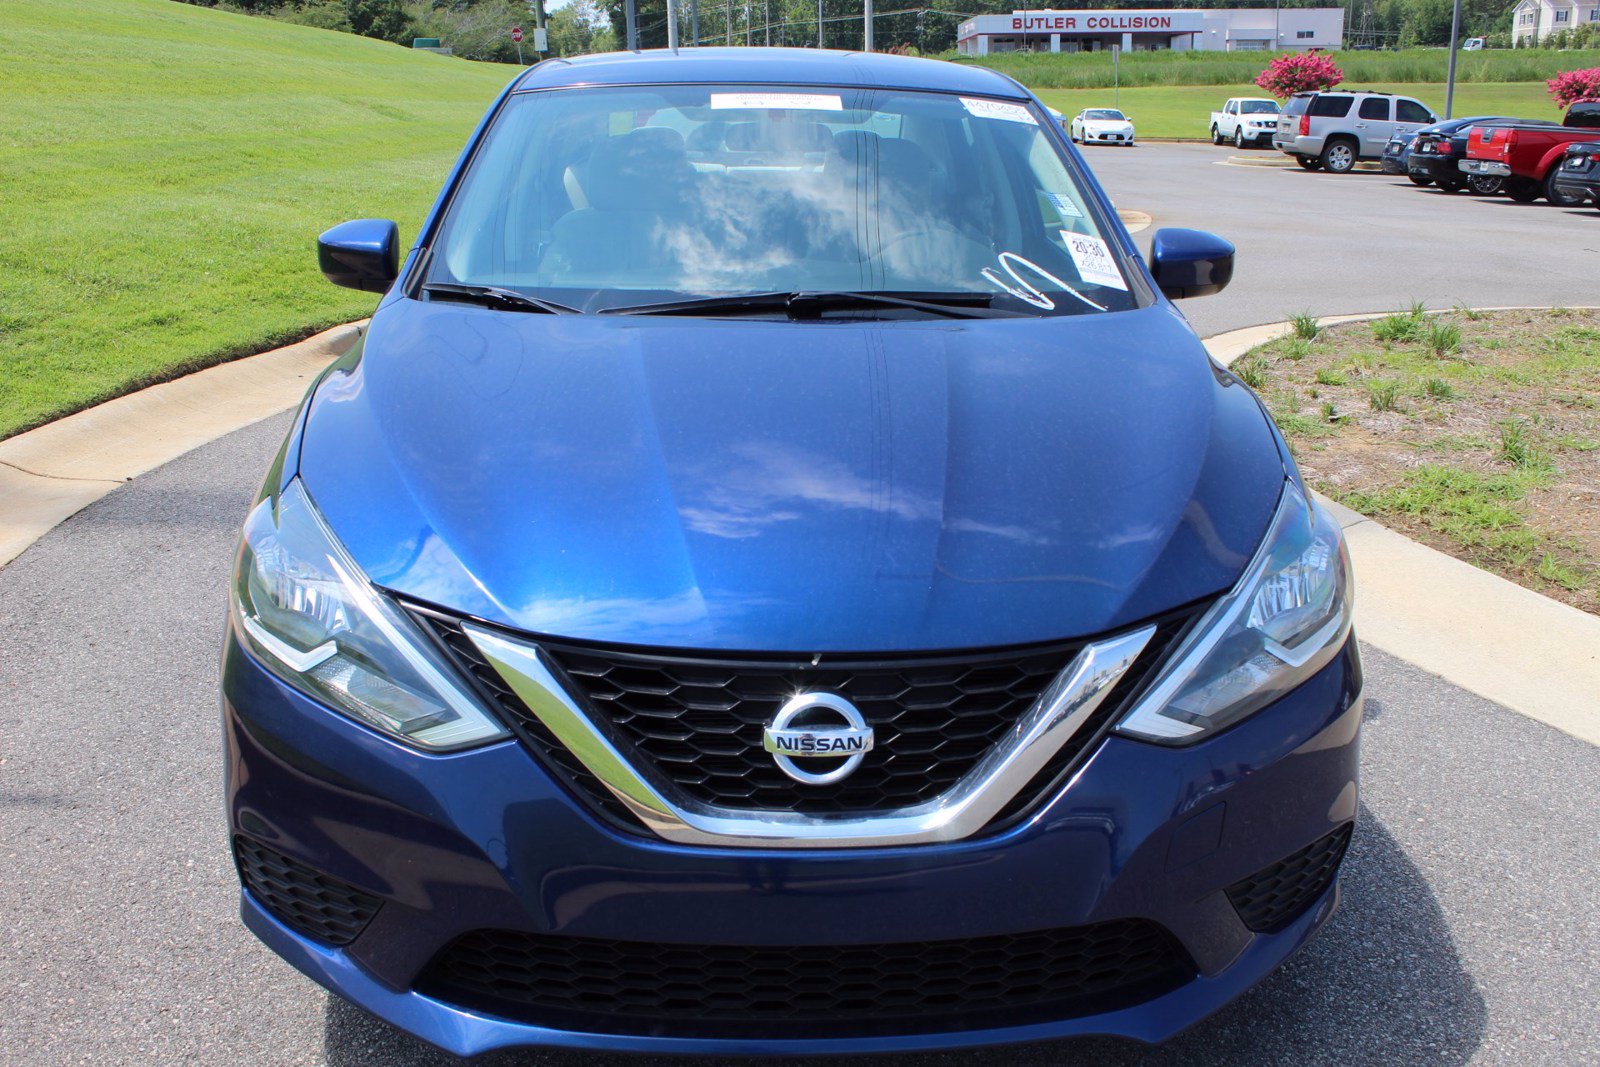 Pre-Owned 2017 Nissan Sentra SV 4dr Car in Macon #GY314579 ...